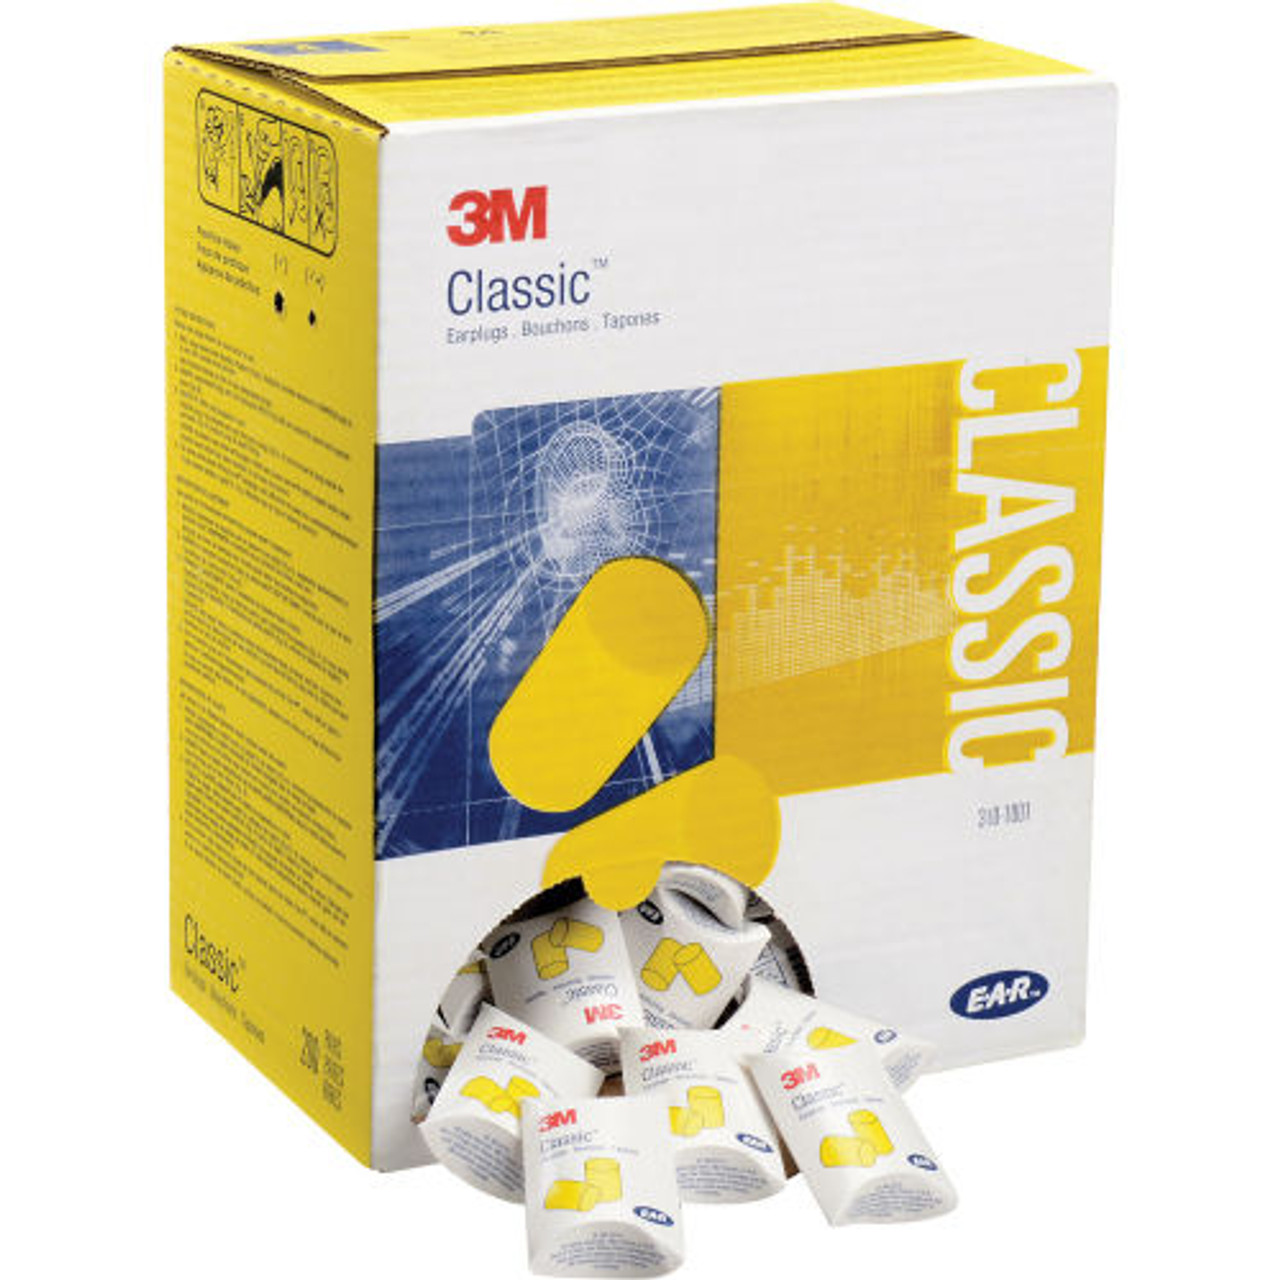 3M 310-1001 E-A-R Classic Uncorded Earplugs (200/Box) - Industrial Safety  Products